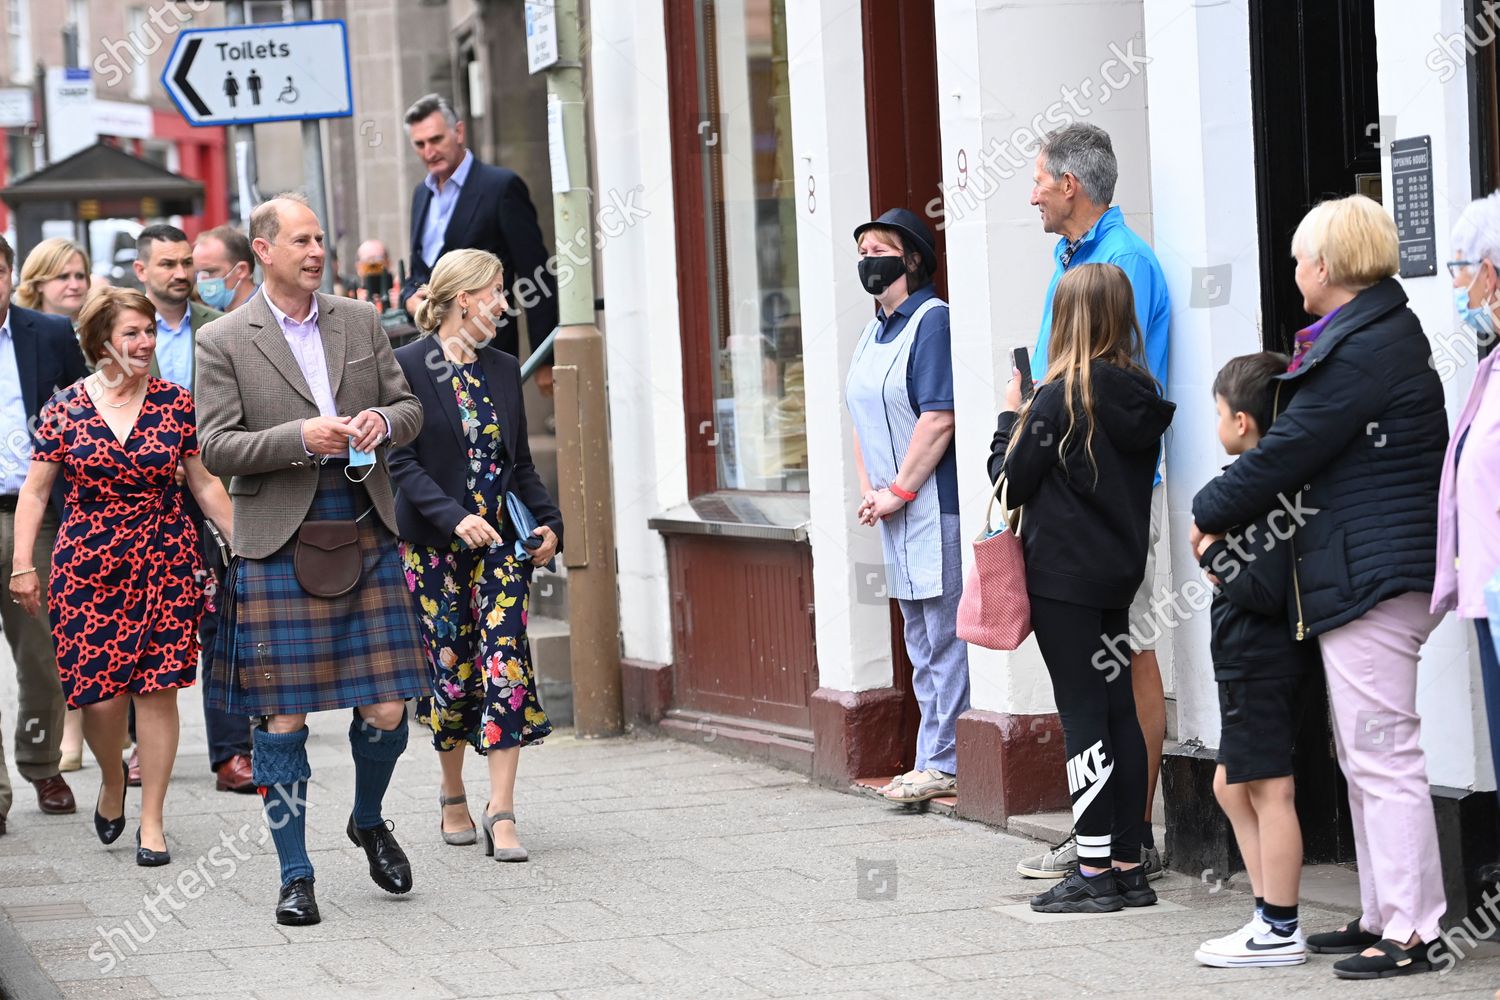 CASA REAL BRITÁNICA - Página 75 Prince-edward-and-sophie-countess-of-wessex-visit-to-s-mart-angus-forfar-scotland-uk-shutterstock-editorial-12172314ab